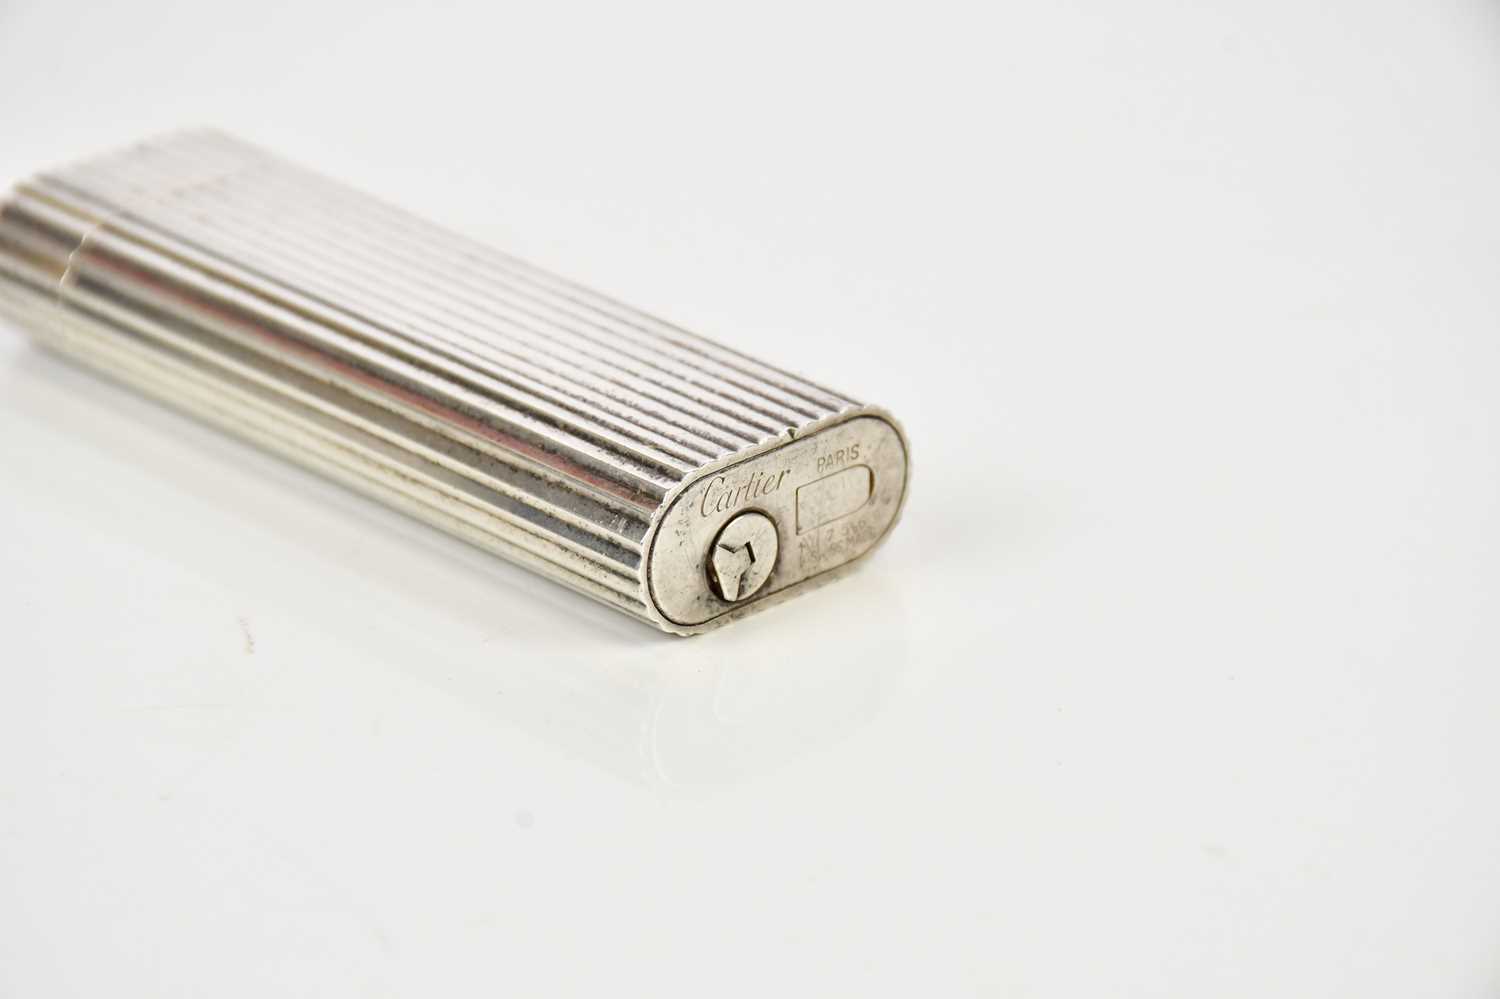 CARTIER; a silver plated cigarette lighter, reference number 107569. - Image 3 of 3